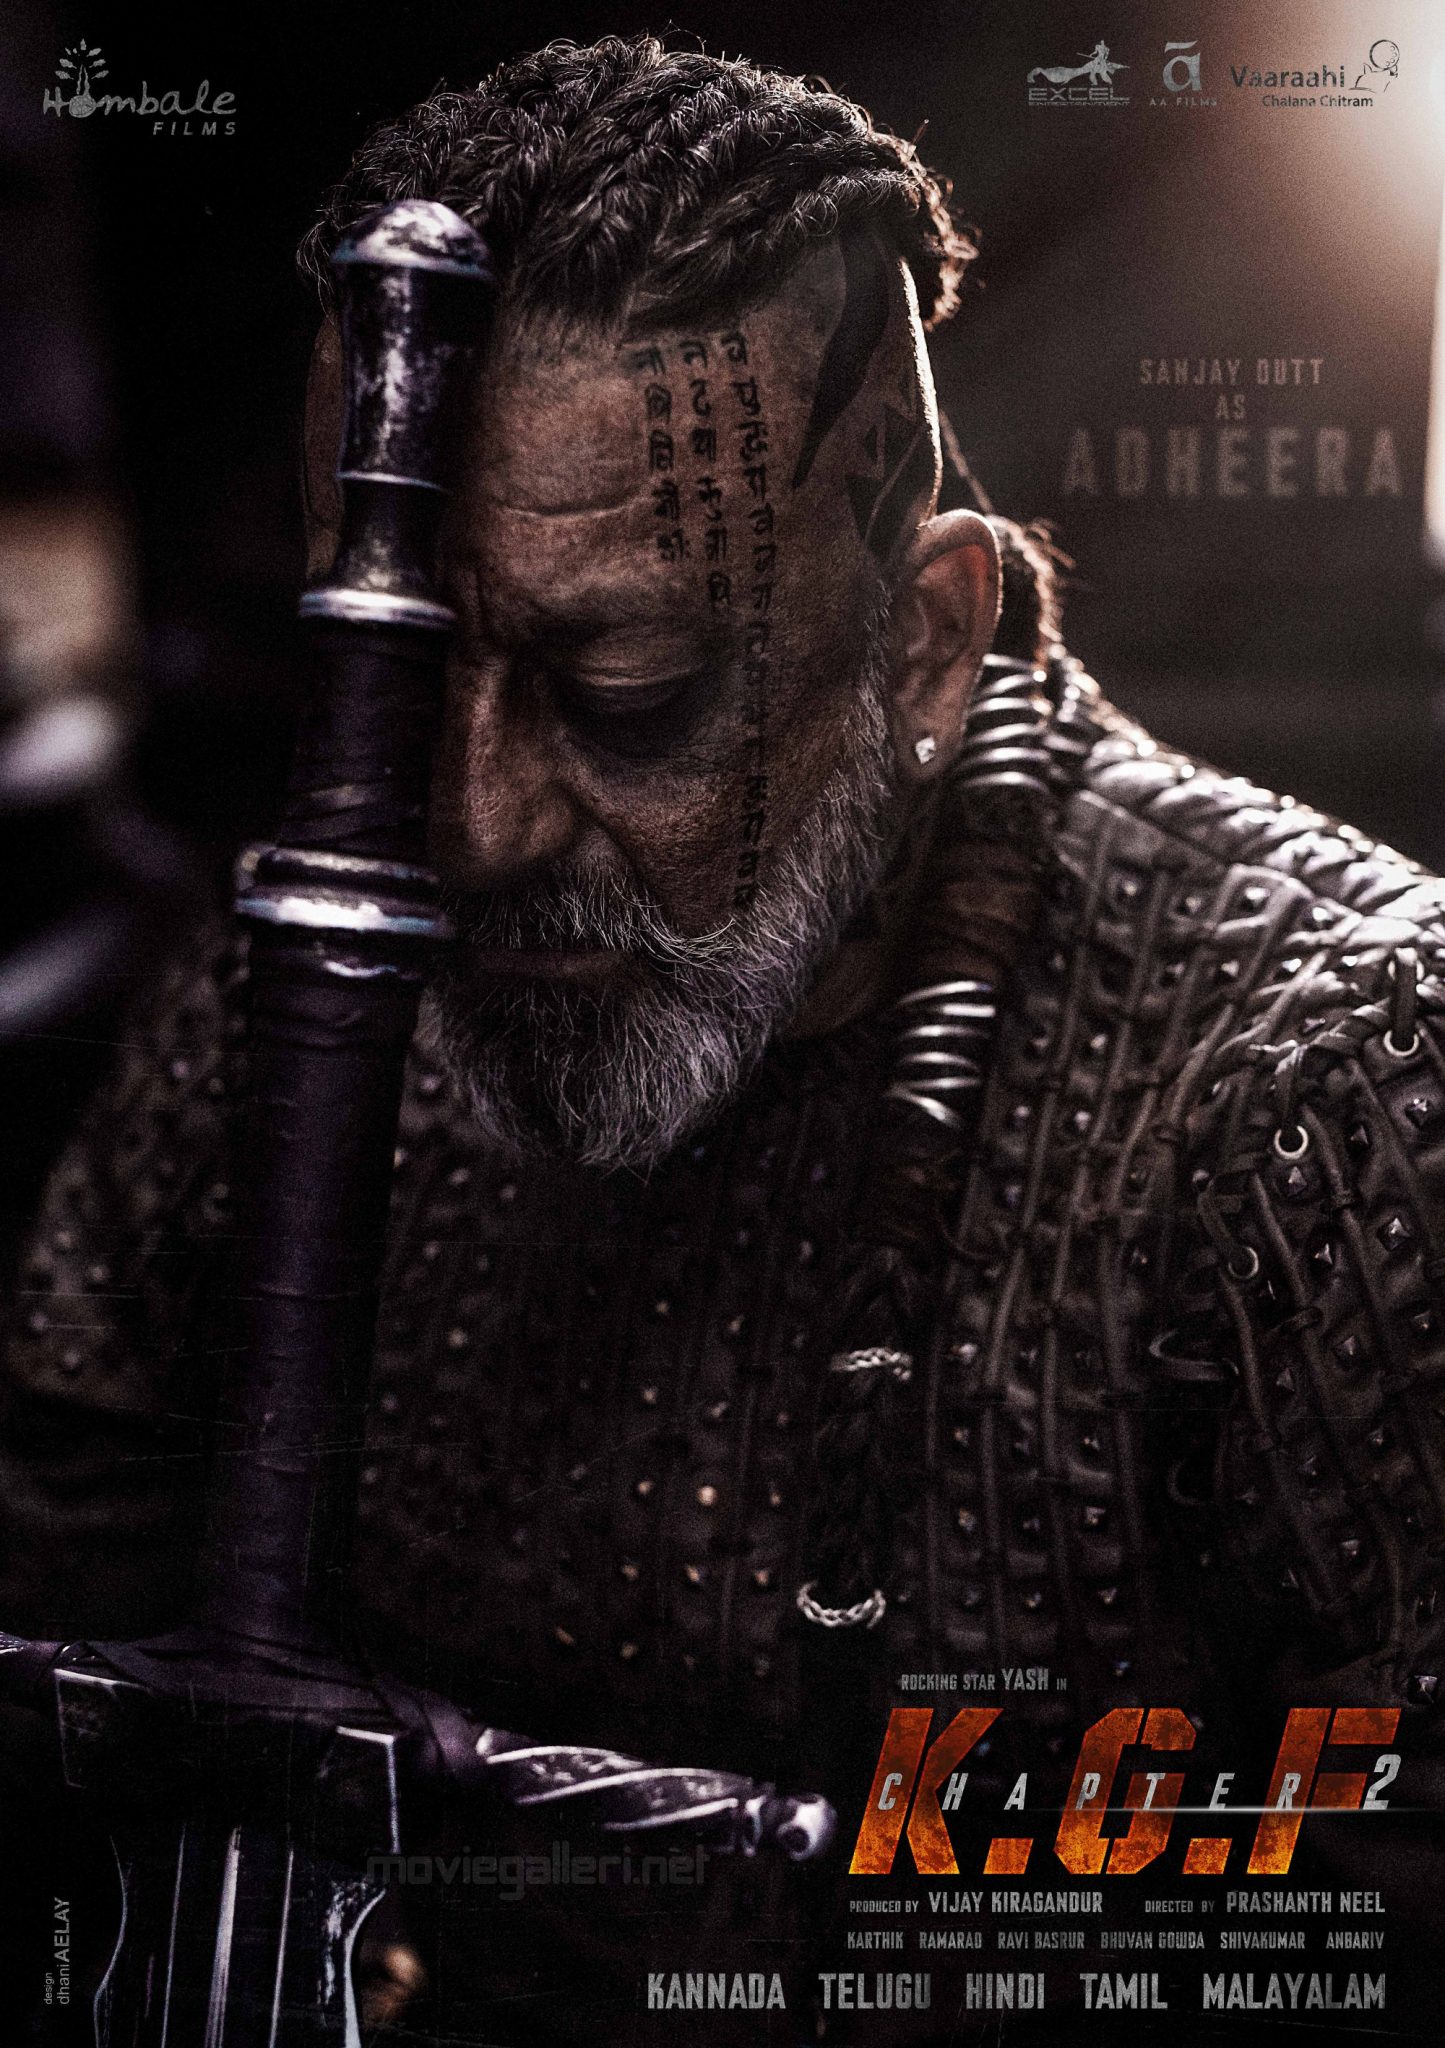 Sanjay Dutt KGF Chapter 2 First Look Poster HD | New Movie Posters